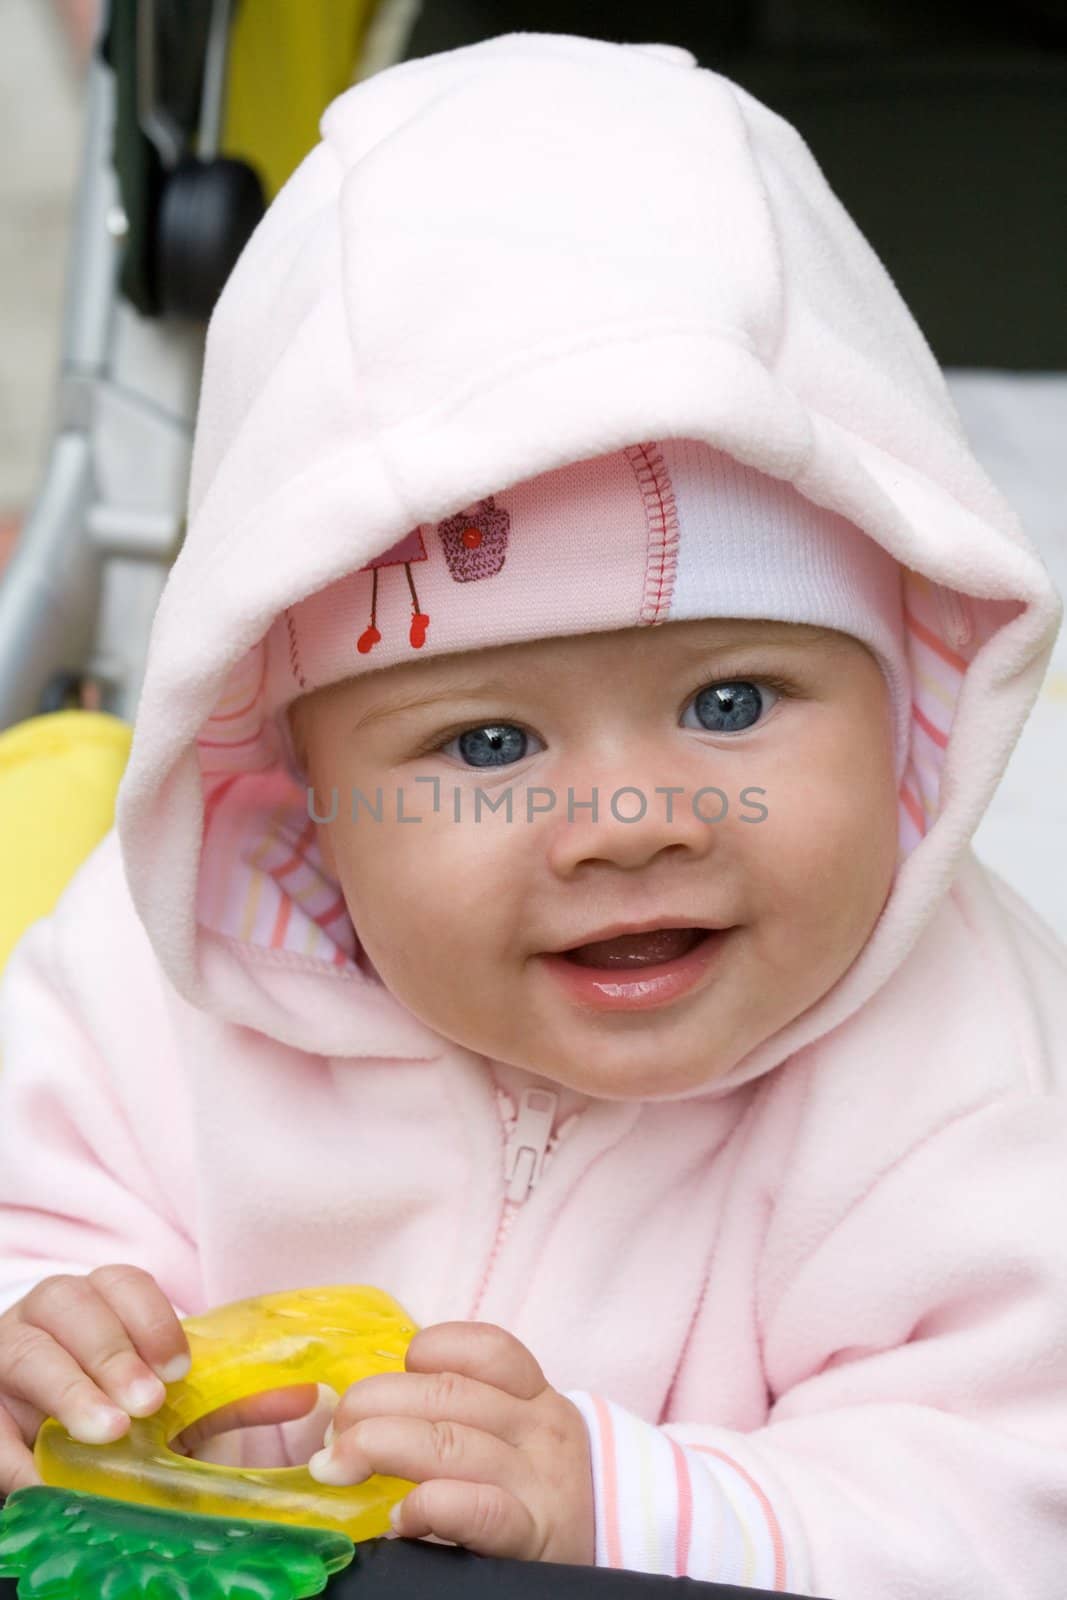 shild series: portrait of little smiling baby